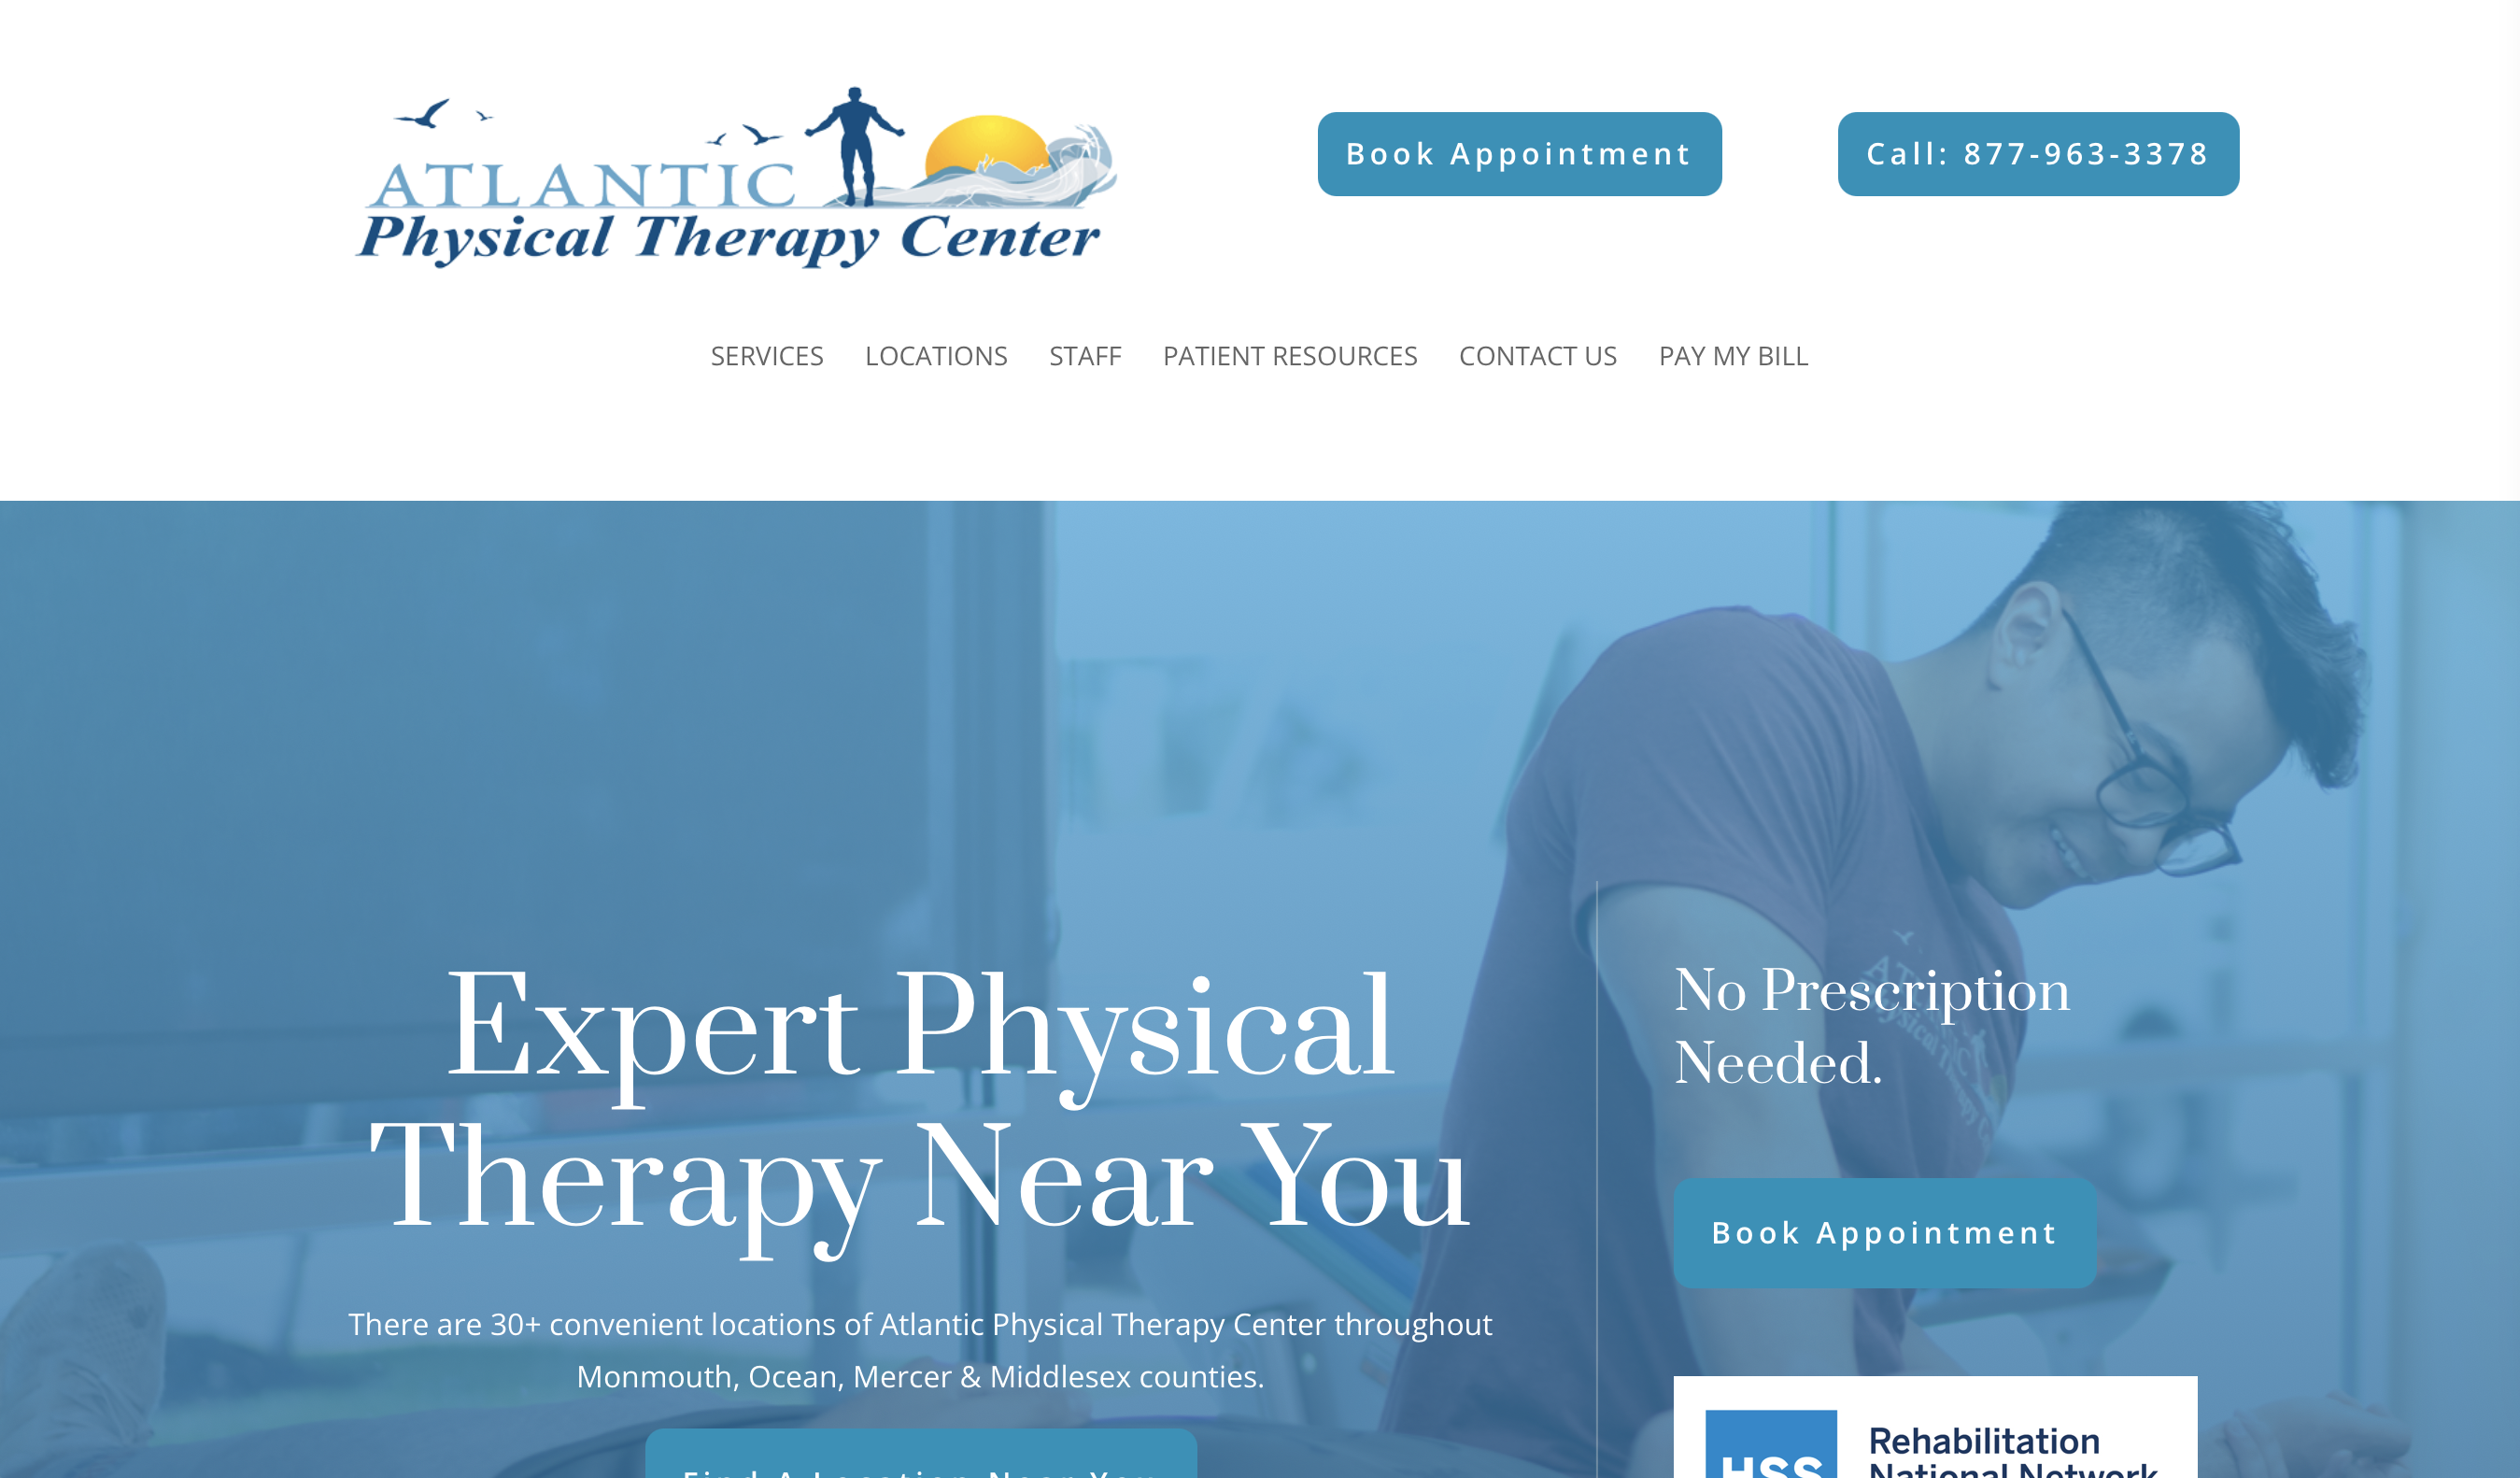 Website for Atlantic Physical Therapy Center